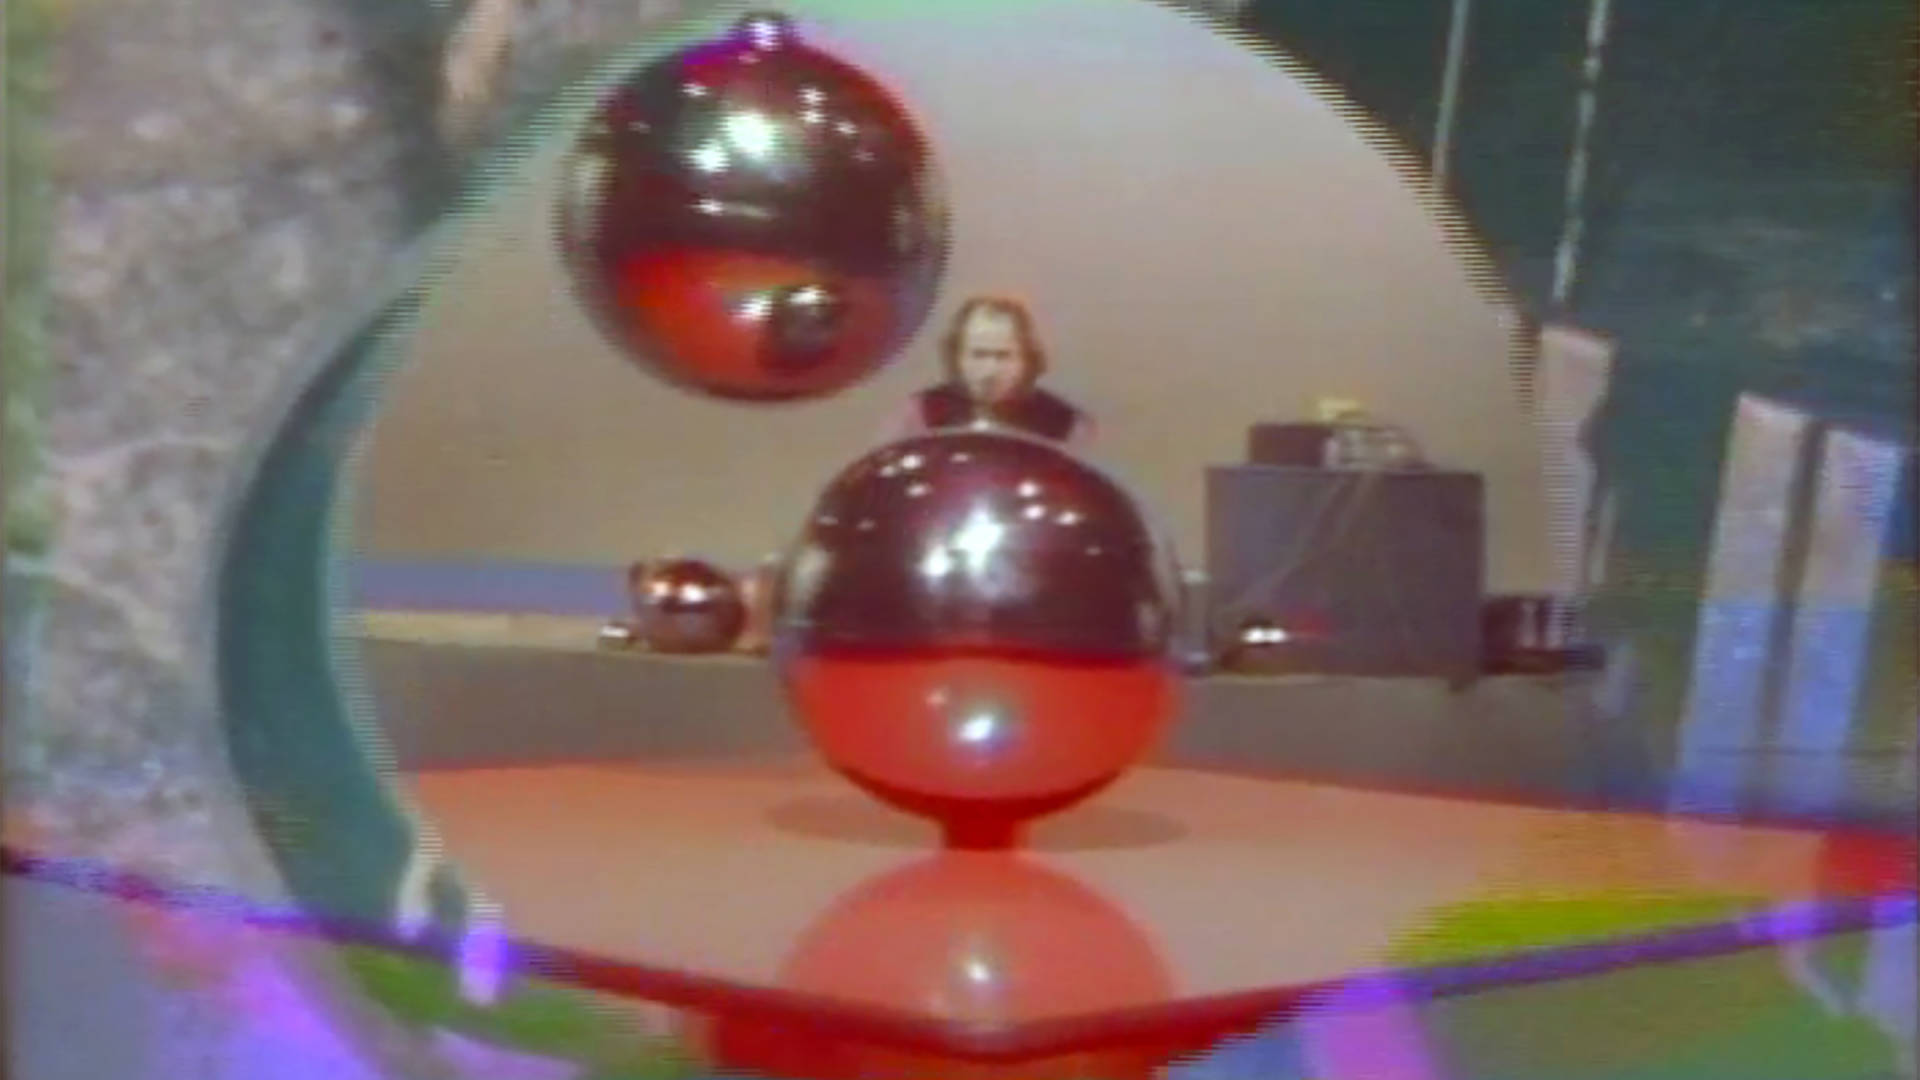 Terry Riley &amp; Arlo Acton, Still from 'Music with Balls,' c. 1968-1969. Courtesy of the UC Berkeley Art Museum and Pacific Film Archive